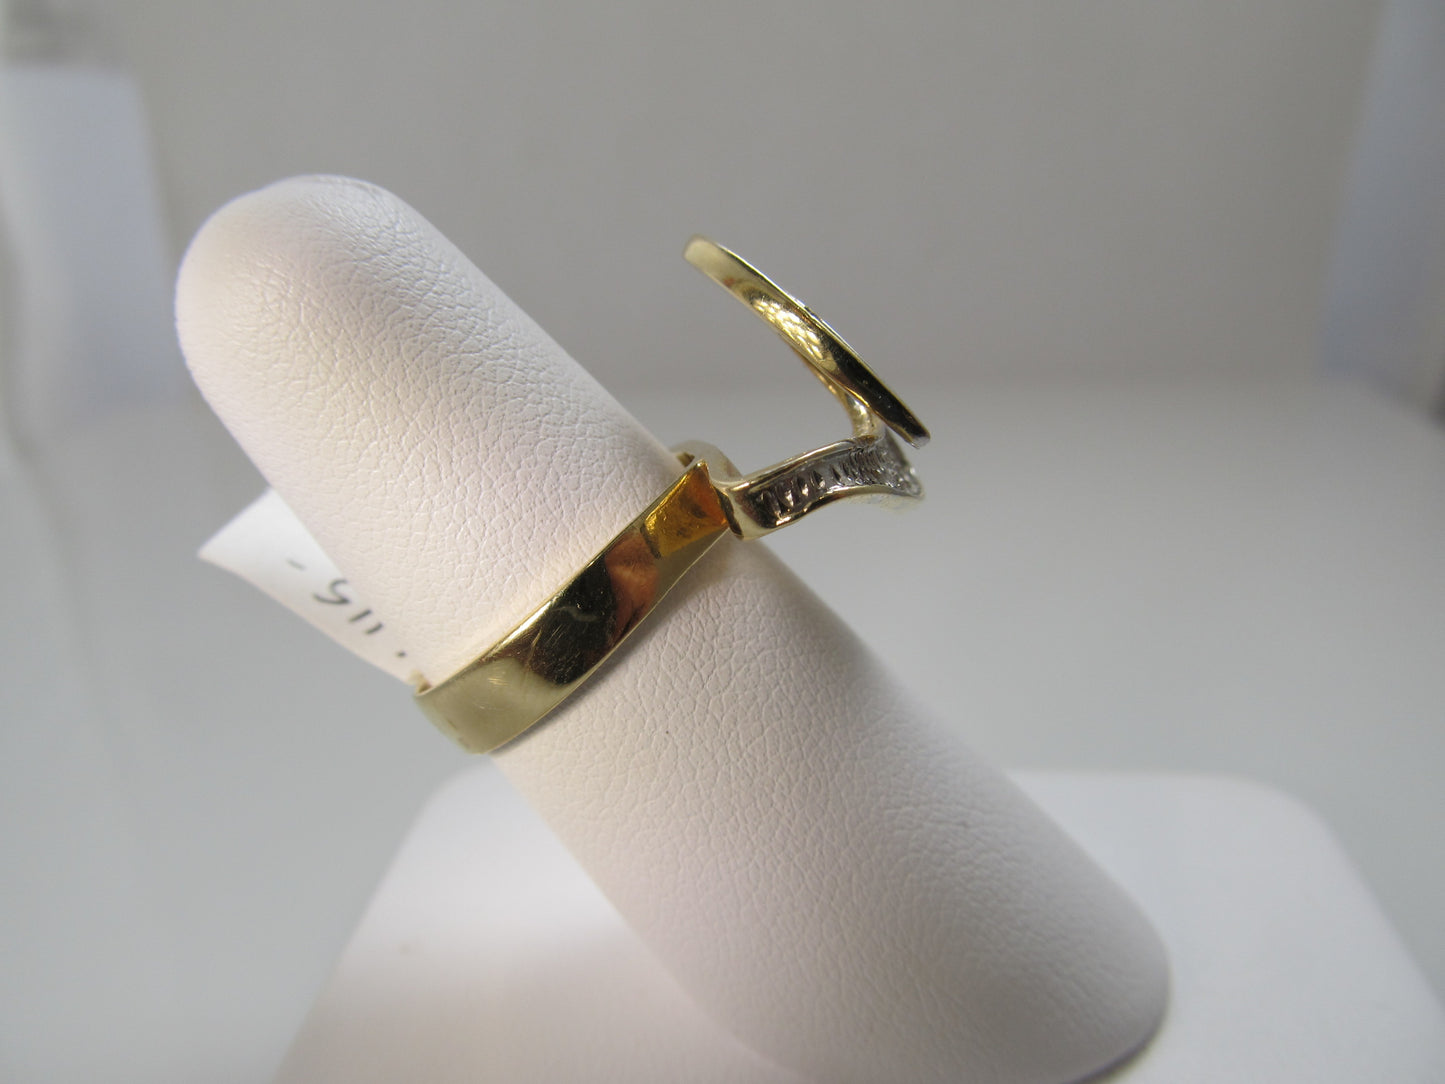 Modernist 14k yellow and white gold diamond ring